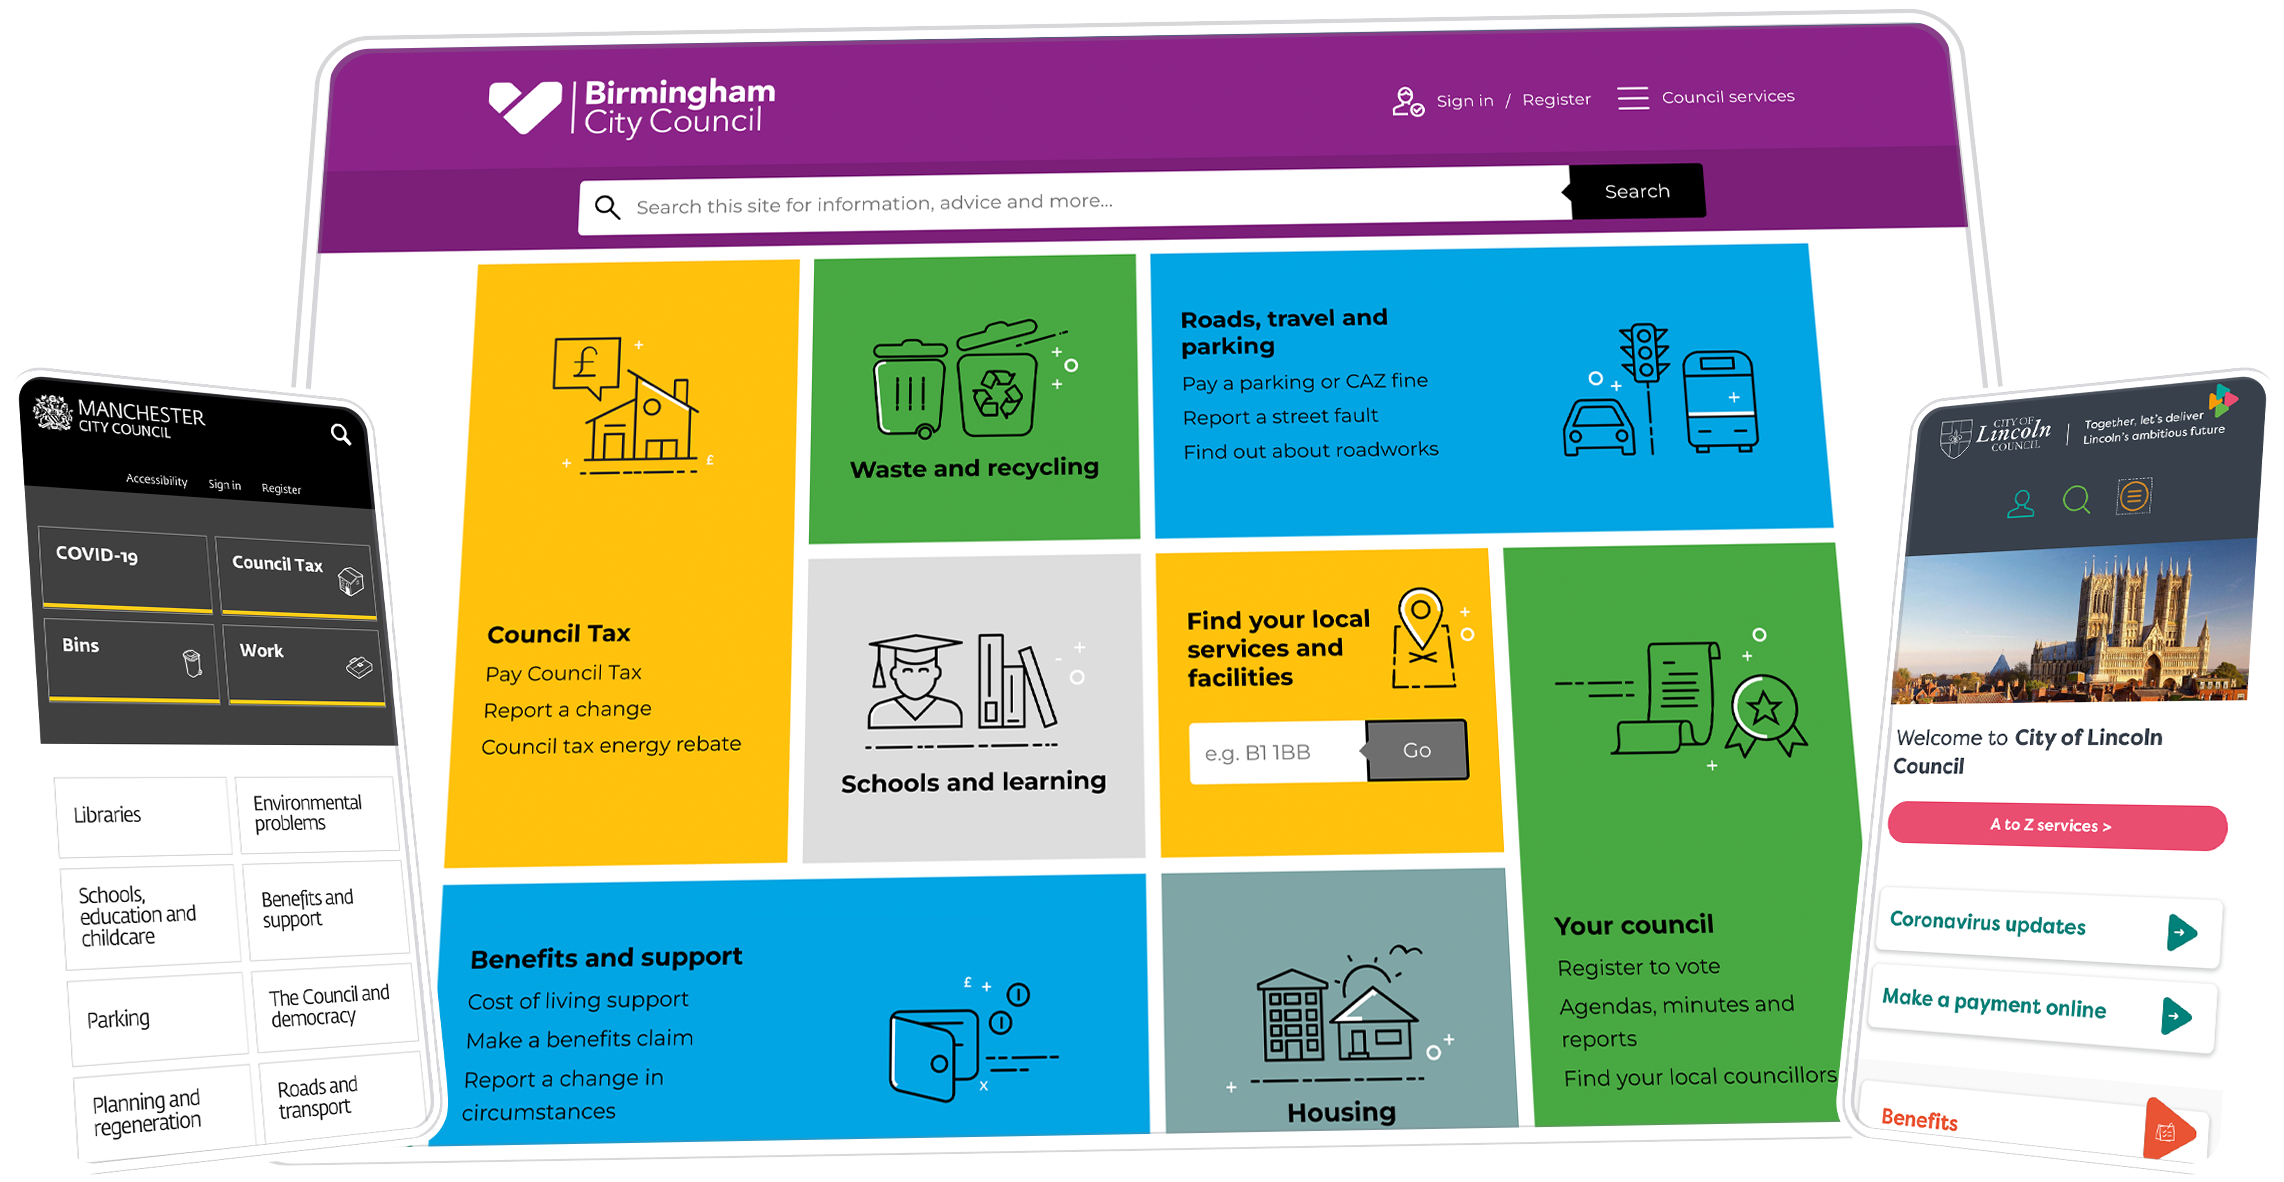 The homepages of Manchester, Birmingham and Lincoln councils